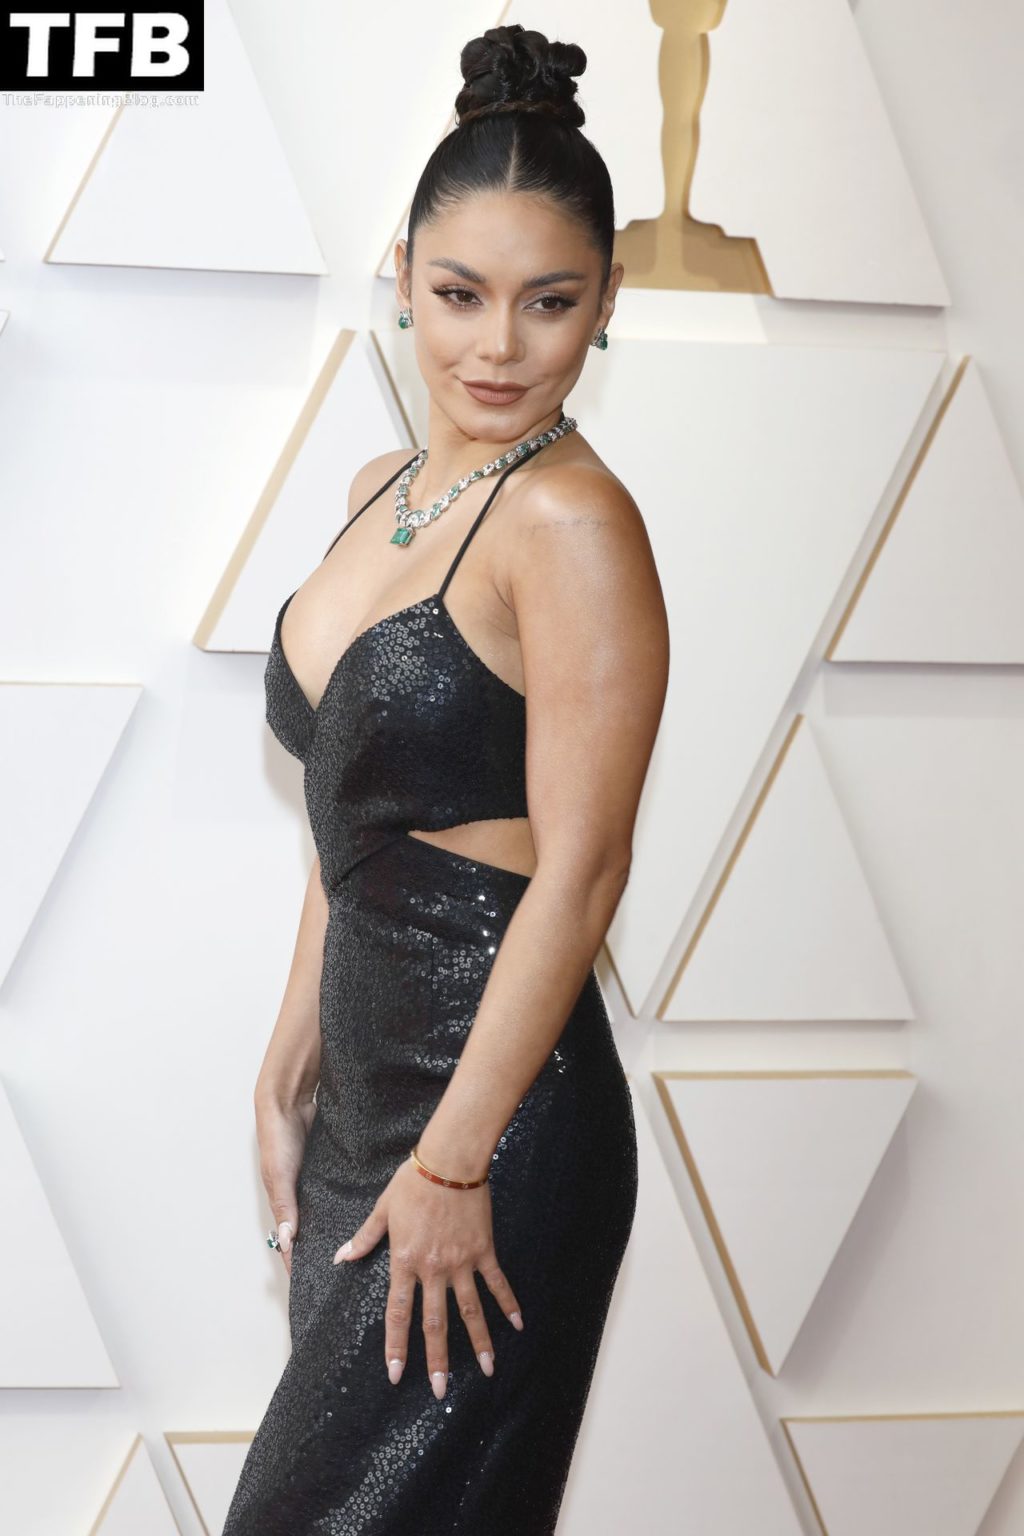 Vanessa Hudgens Sexy The Fappening Blog 75 2 1024x1536 - Vanessa Hudgens Poses on the Red Carpet at the 94th Annual Academy Awards (83 Photos)